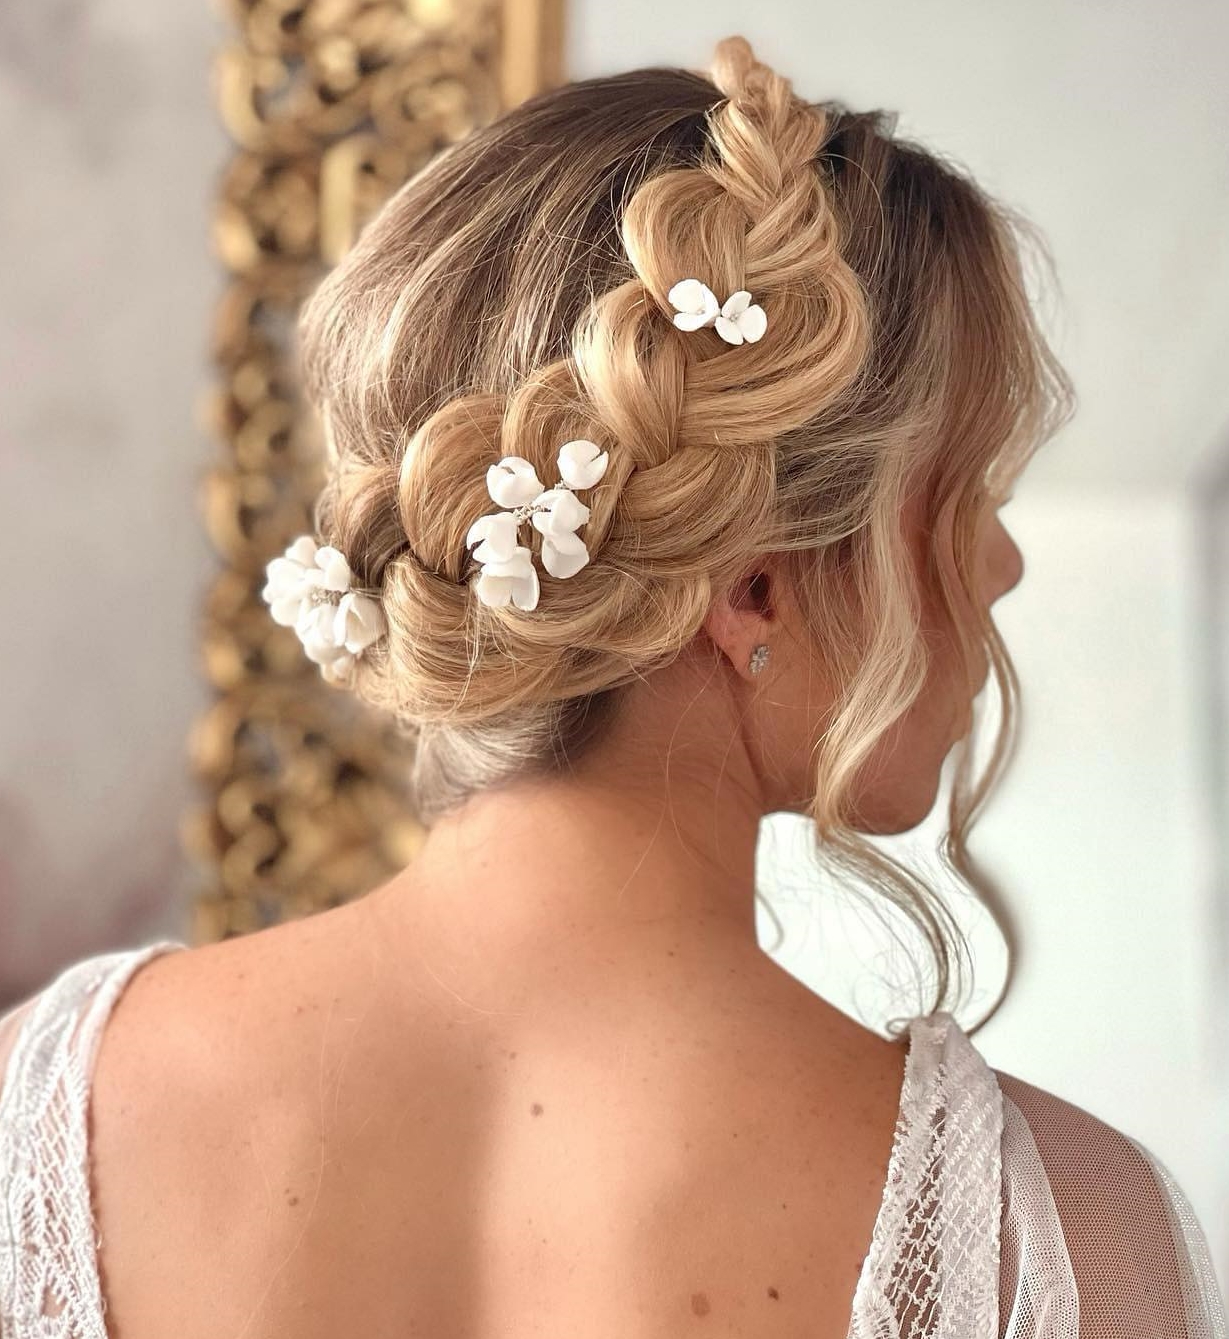 Wedding Milkmaid Braid Hairstyle with Floral Decor